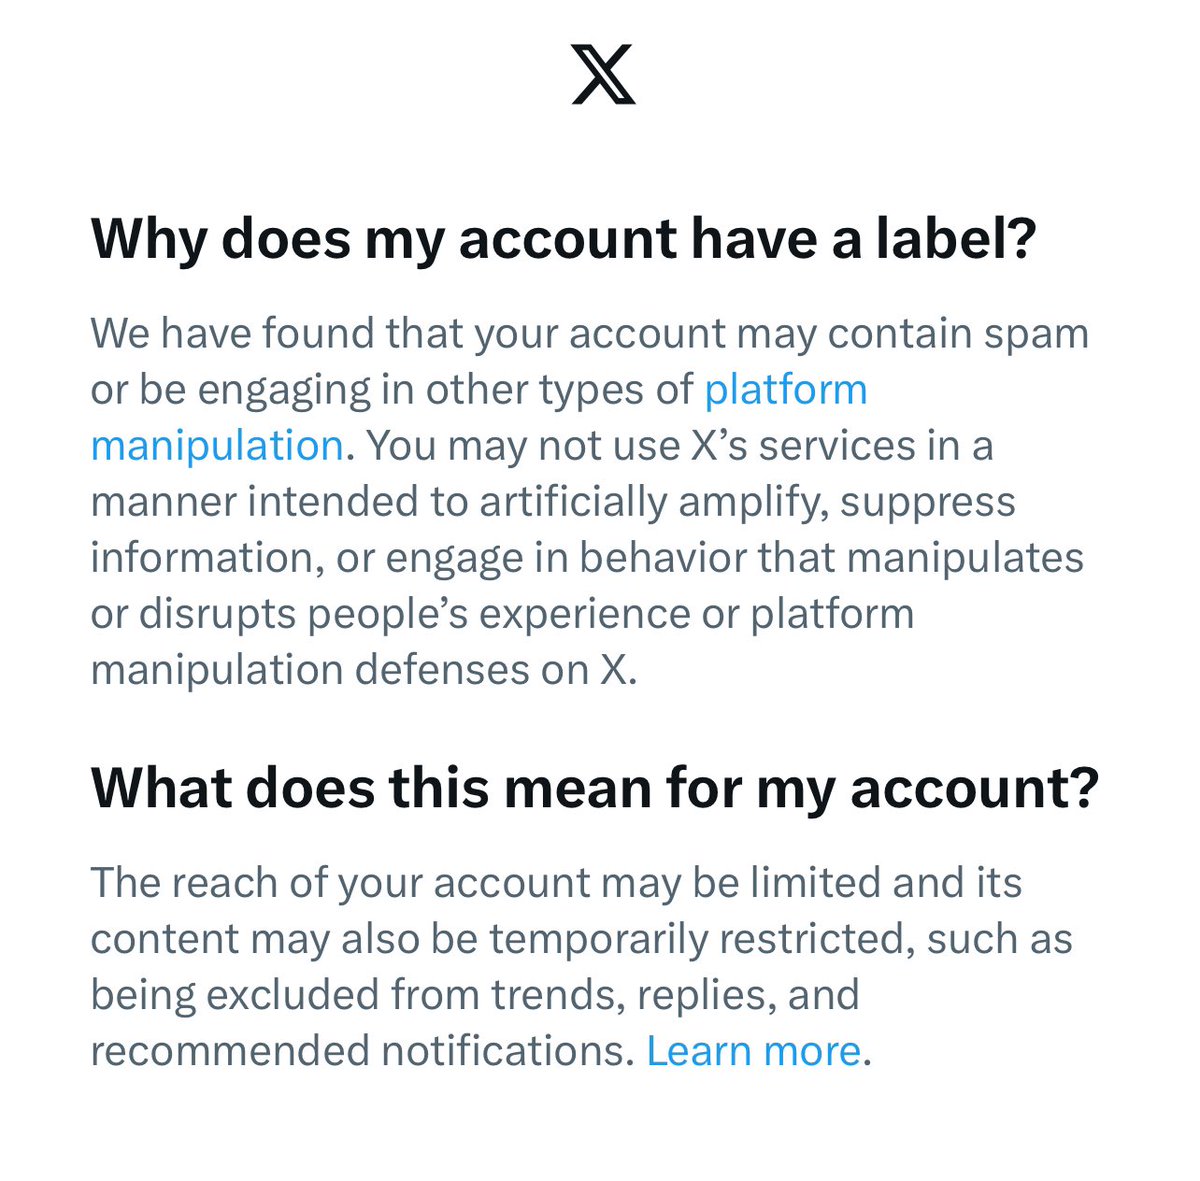 Yesterday, I asked Elon Musk about his Dogecoin lawsuit and today I get notified that my account may contain spam? So much for free speech @elonmusk! Targeting a user with only 800 followers instead of the accounts with millions of followers spreading real hate & disinformation.